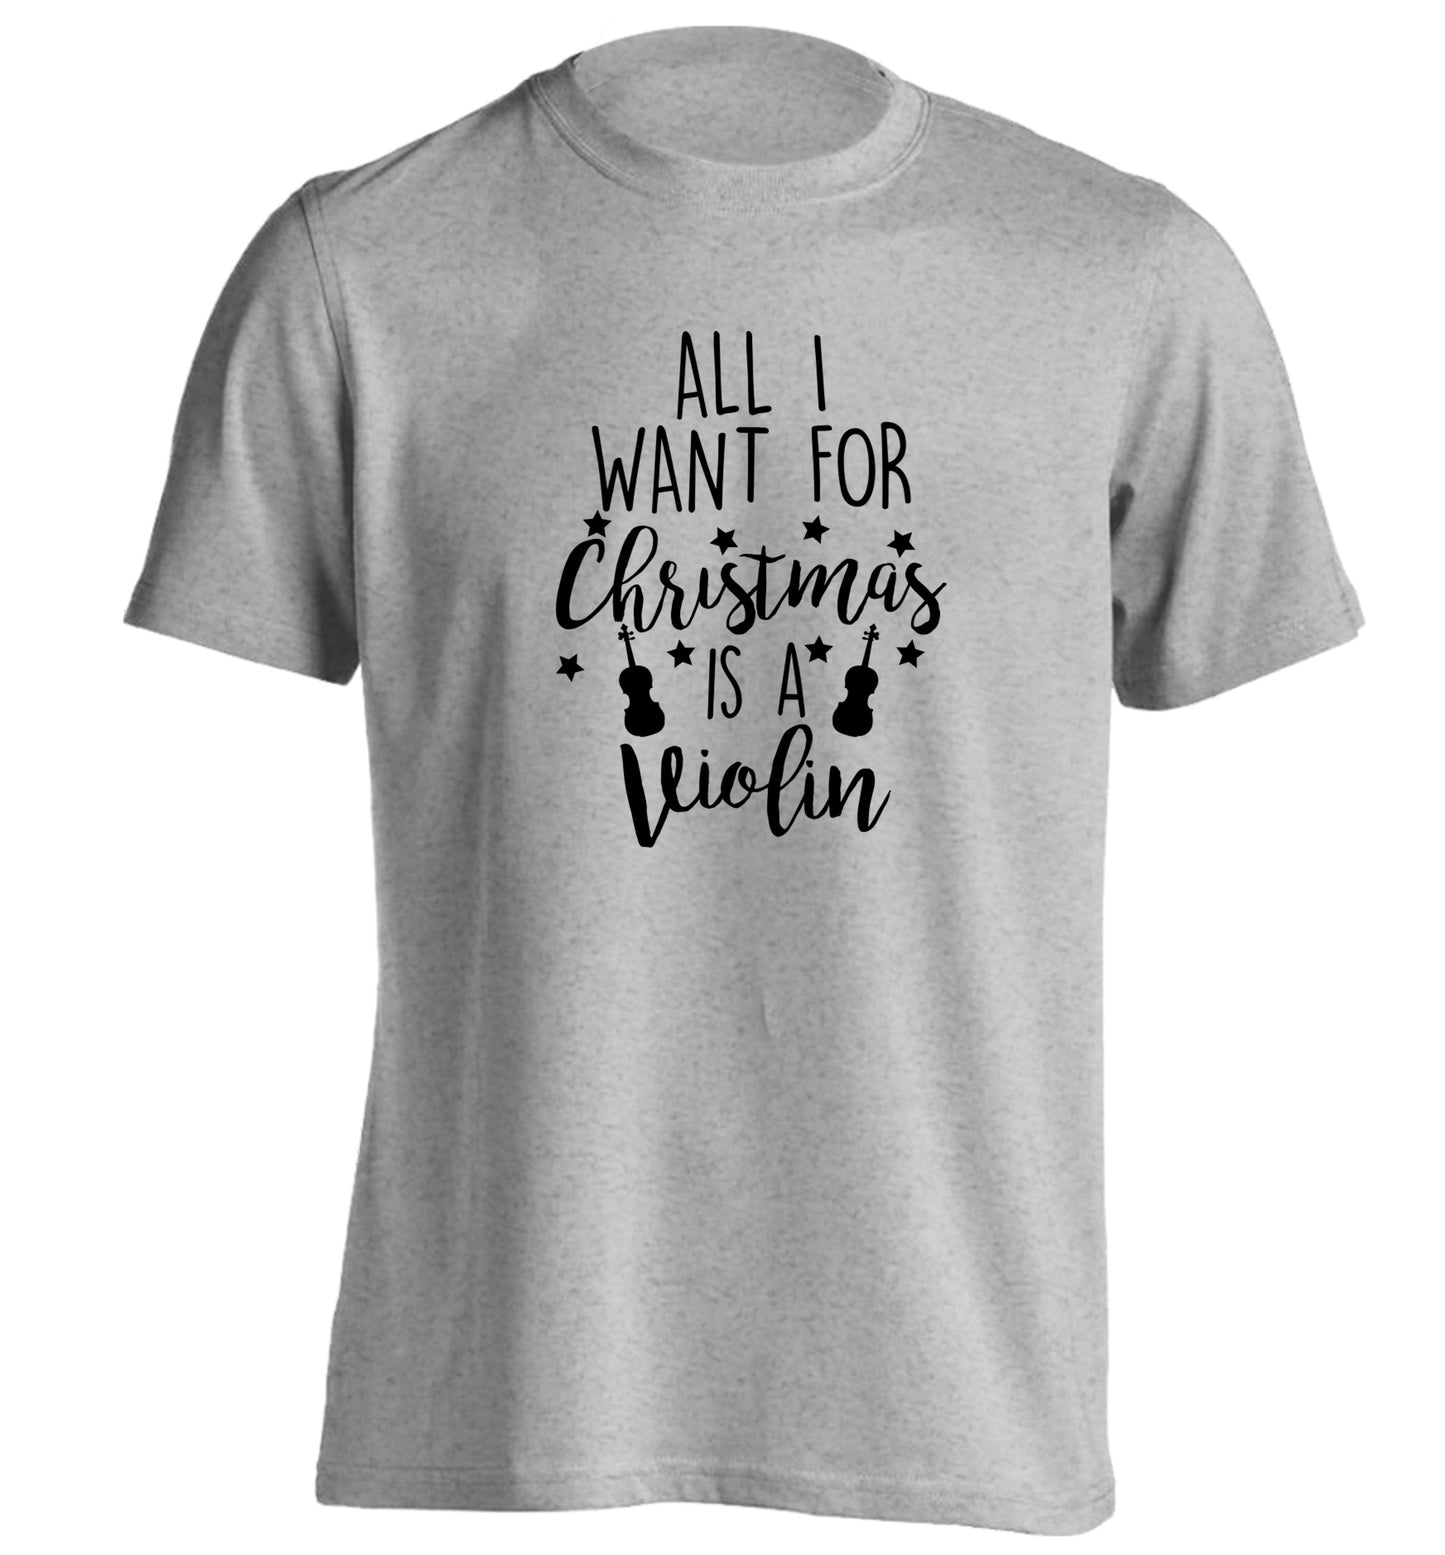 All I Want For Christmas is a Violin adults unisex grey Tshirt 2XL